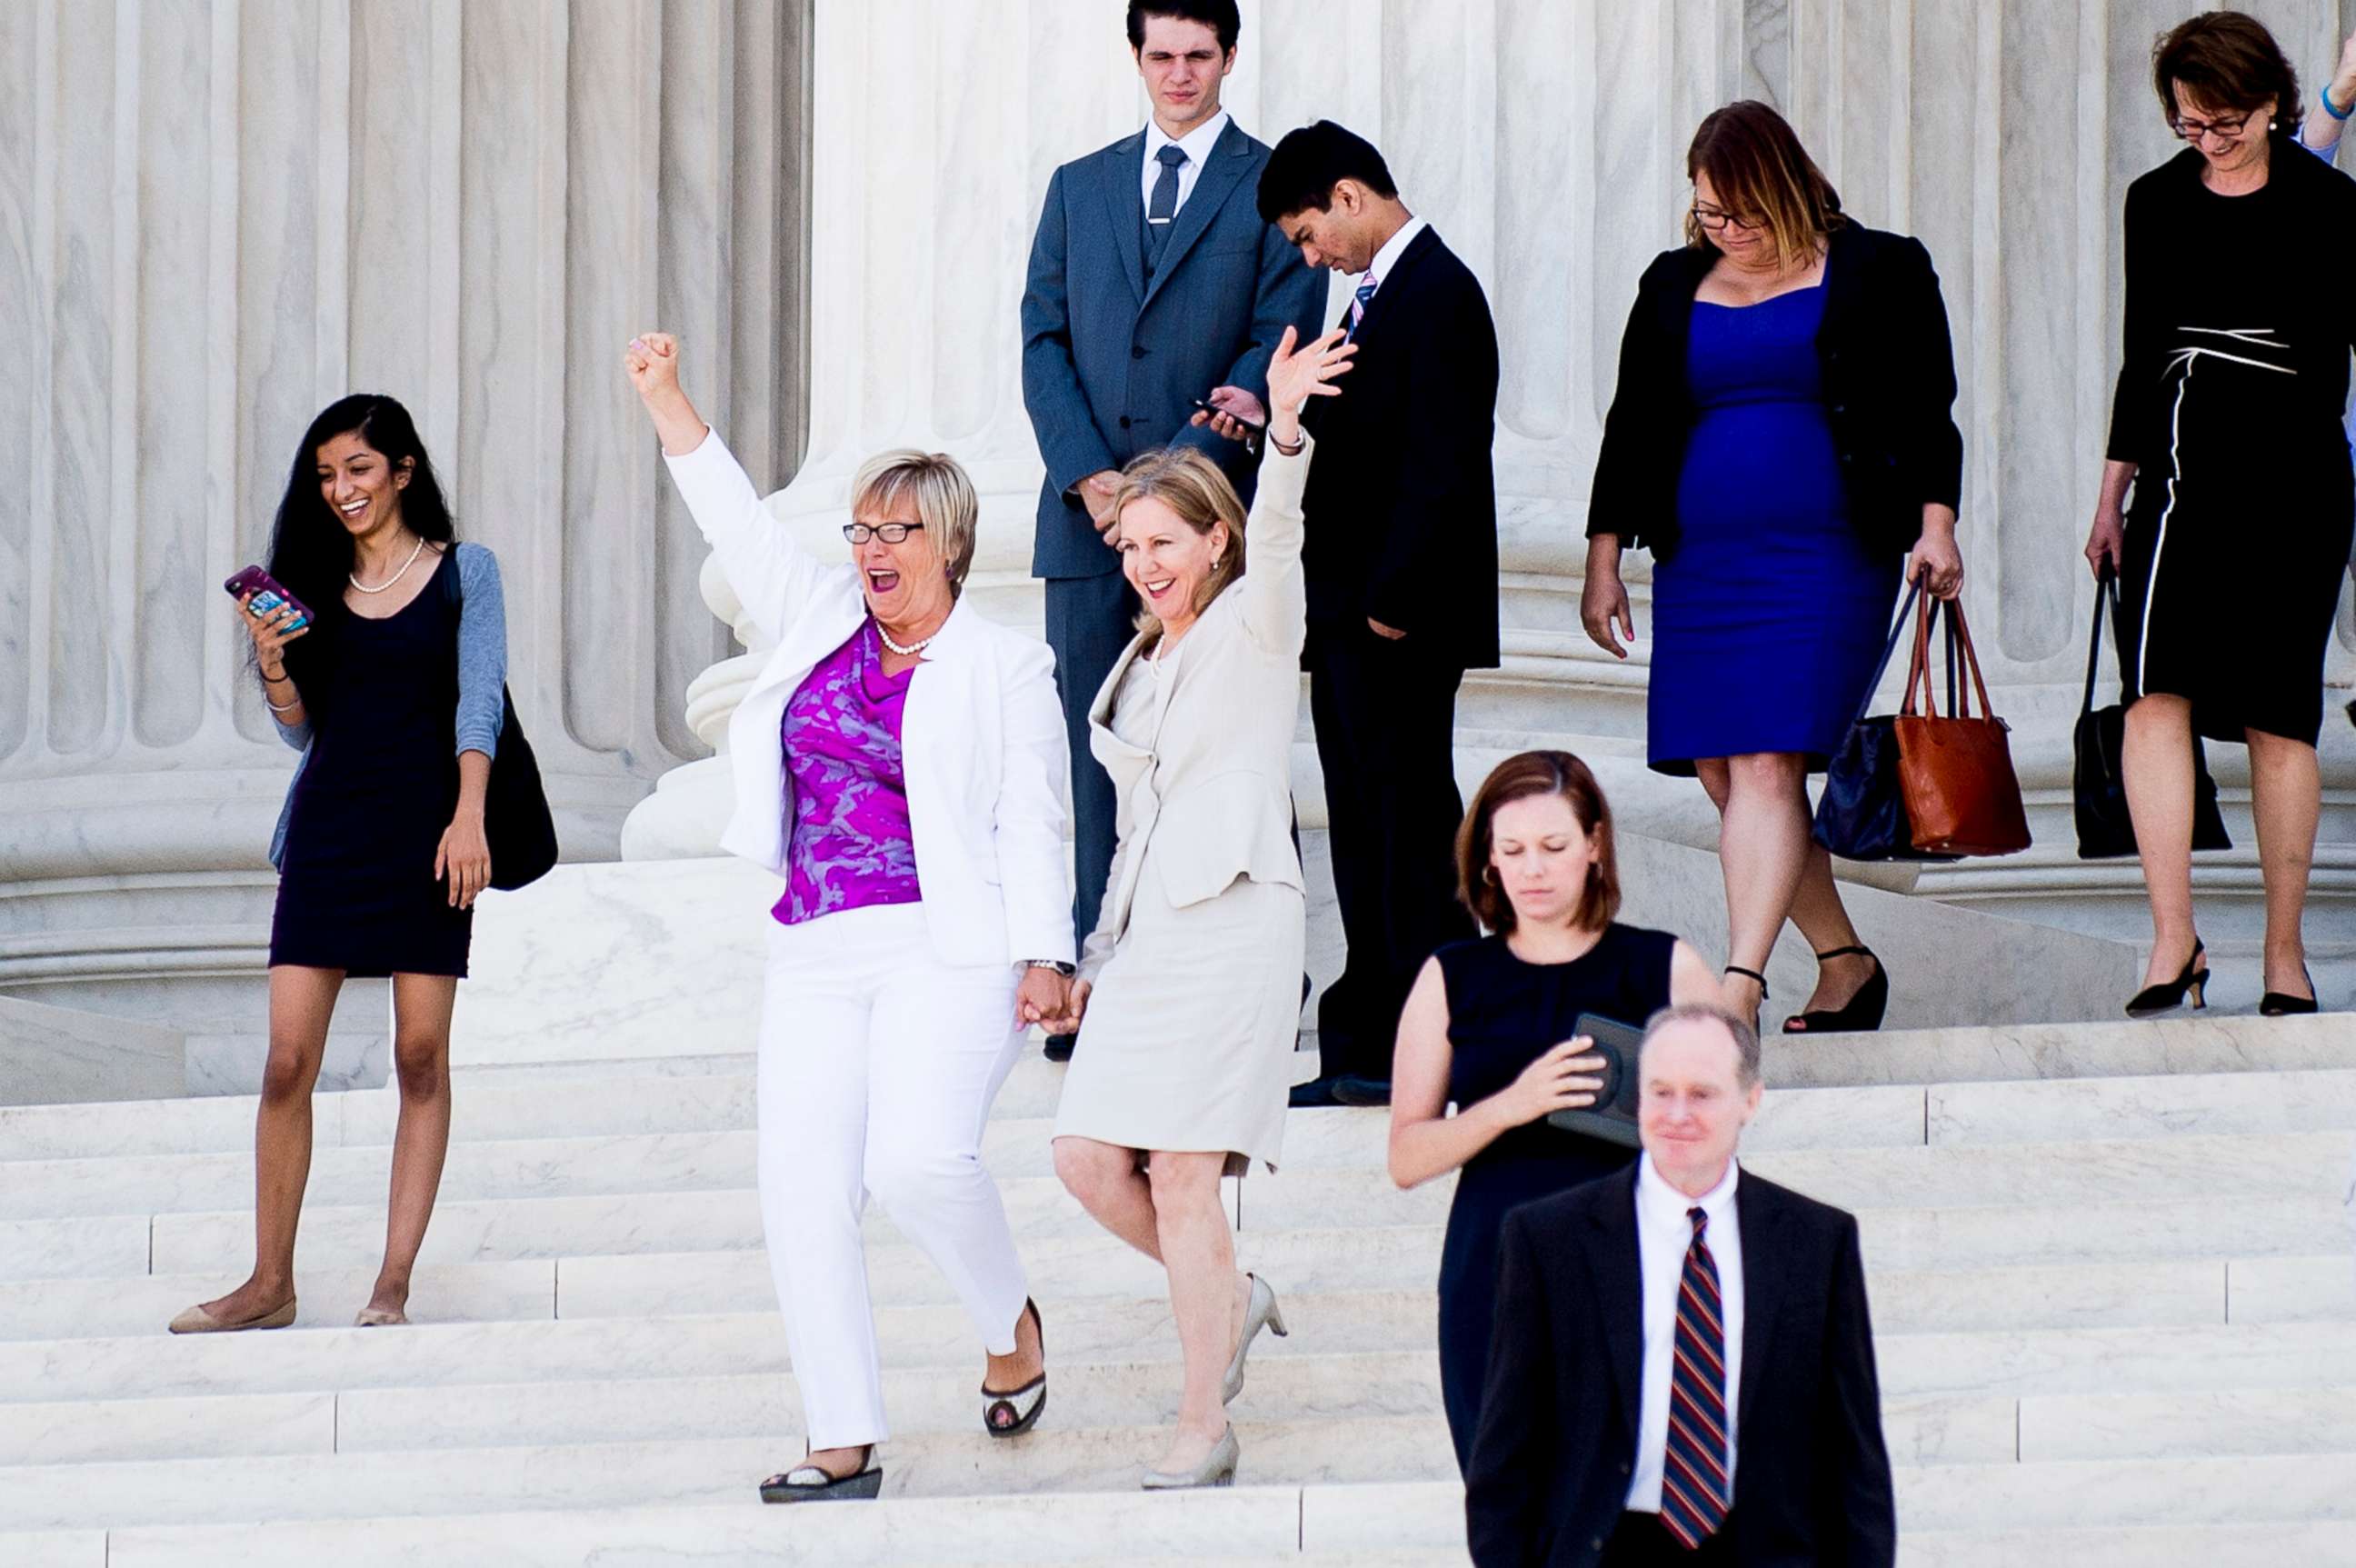 PHOTO: Texas abortion provider Amy Hagstrom-Miller and Nancy Northup, President of The Center for Reproductive Rights wave to supporters as they decend the steps of the United States Supreme Court on June 27, 2016, in Washington.